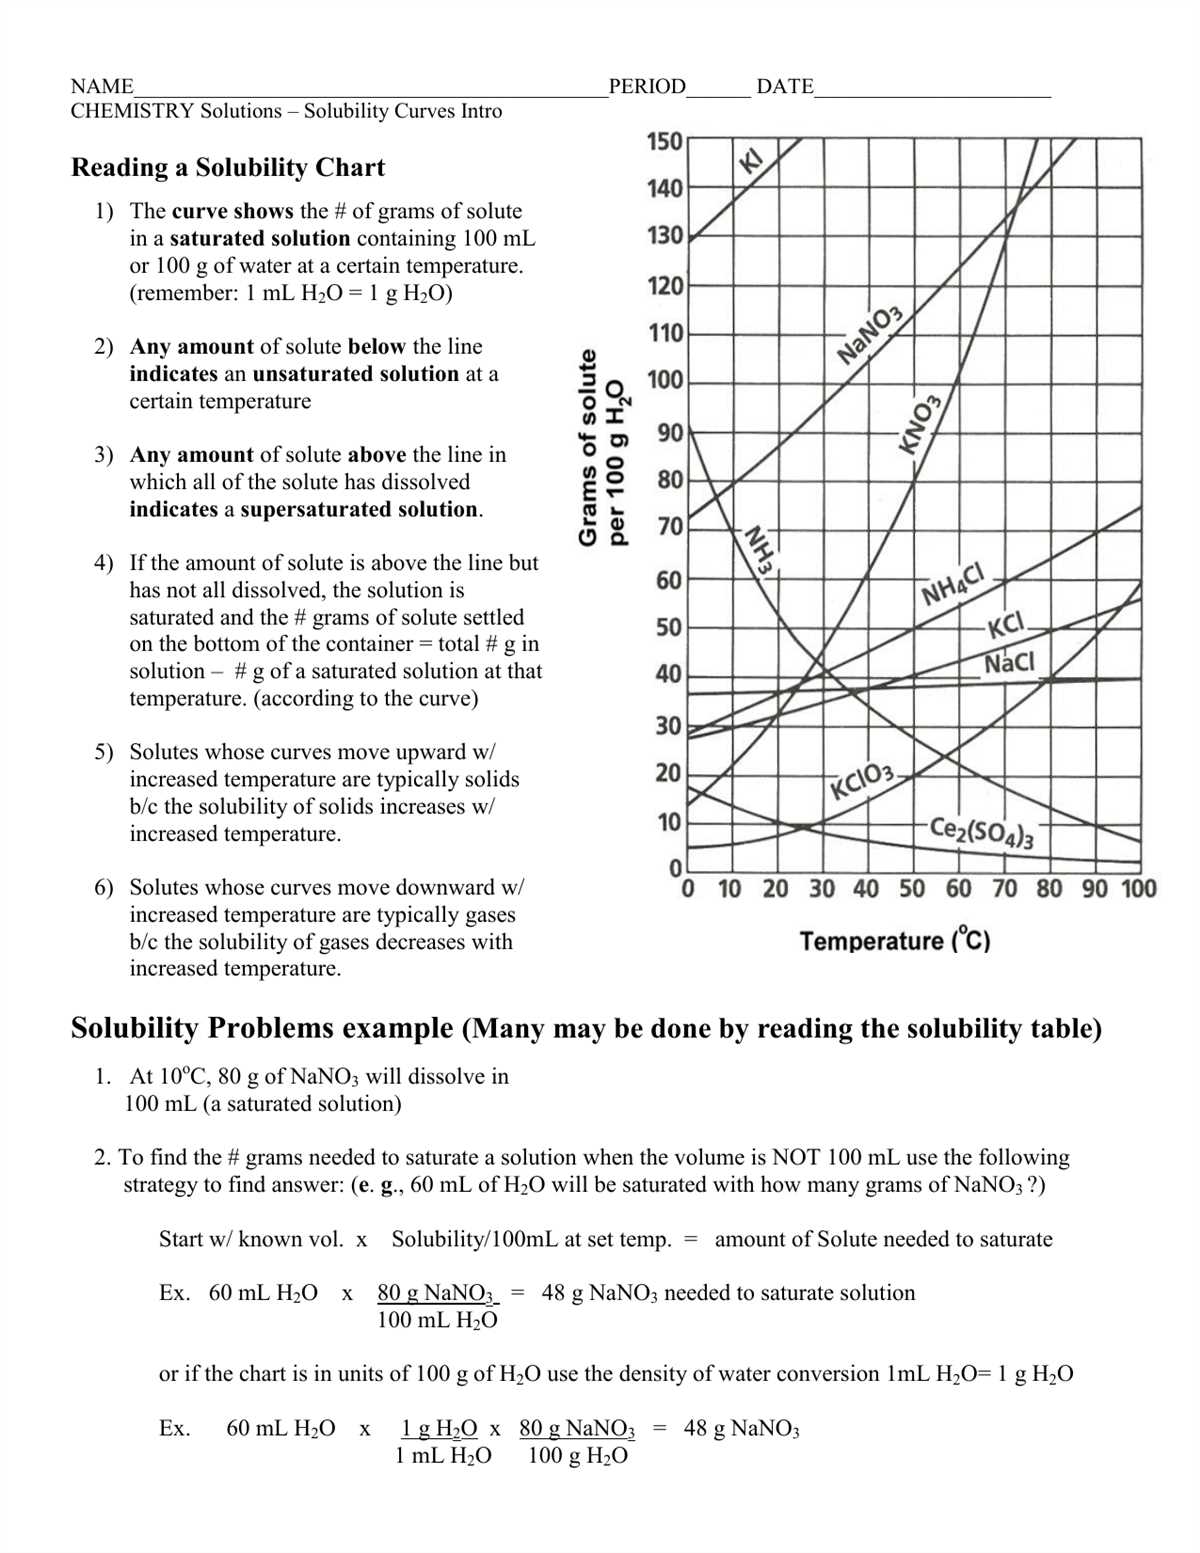 Common Questions and Concerns About the Heating Cooling Curve Worksheet